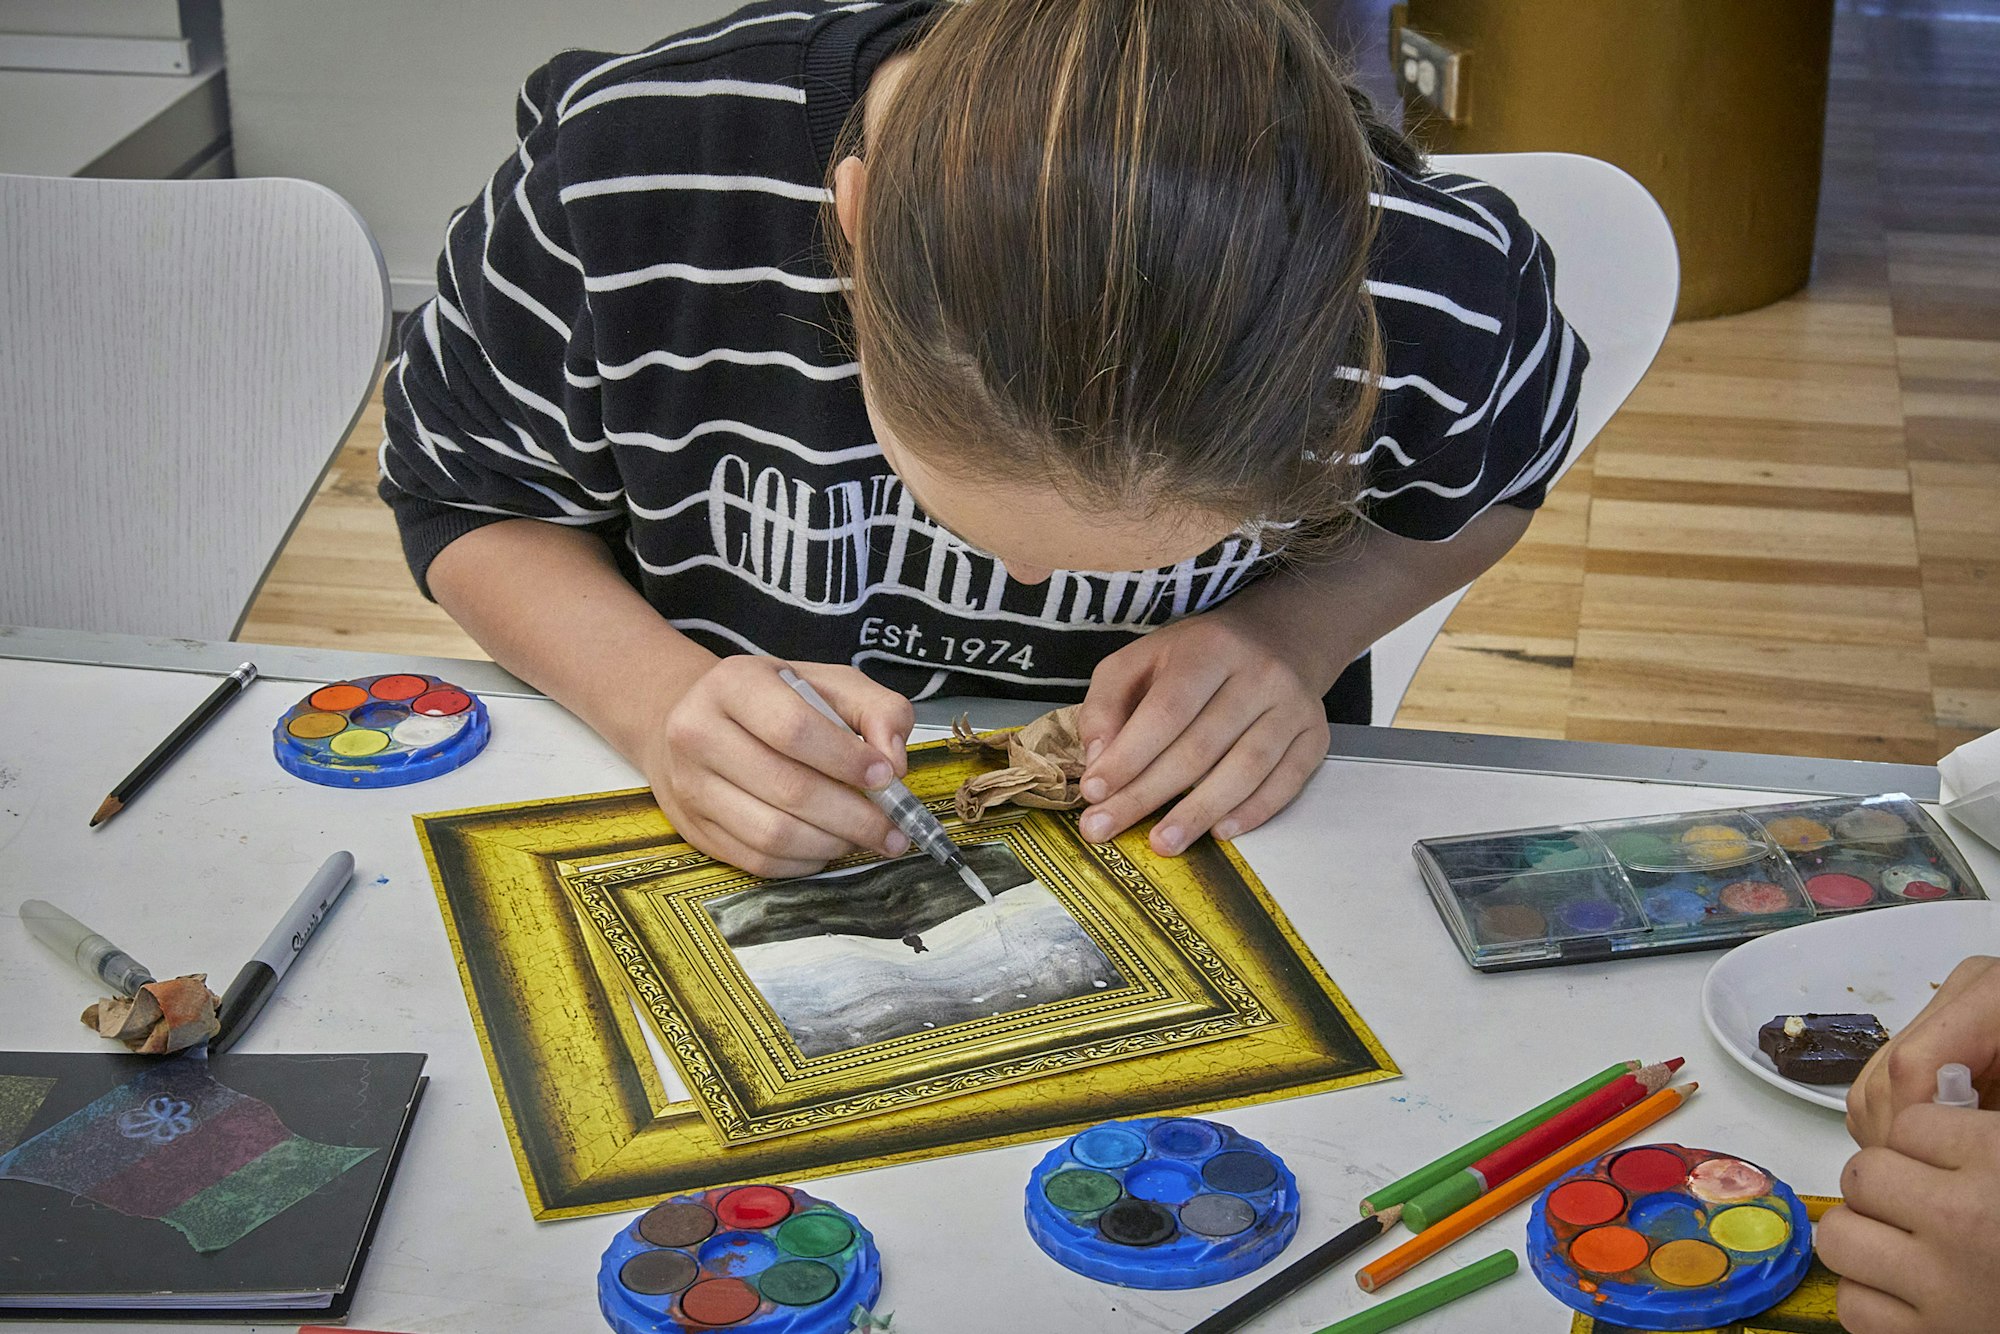 A person sits leaning over an art project in progress, surrounded by paints and other art materials